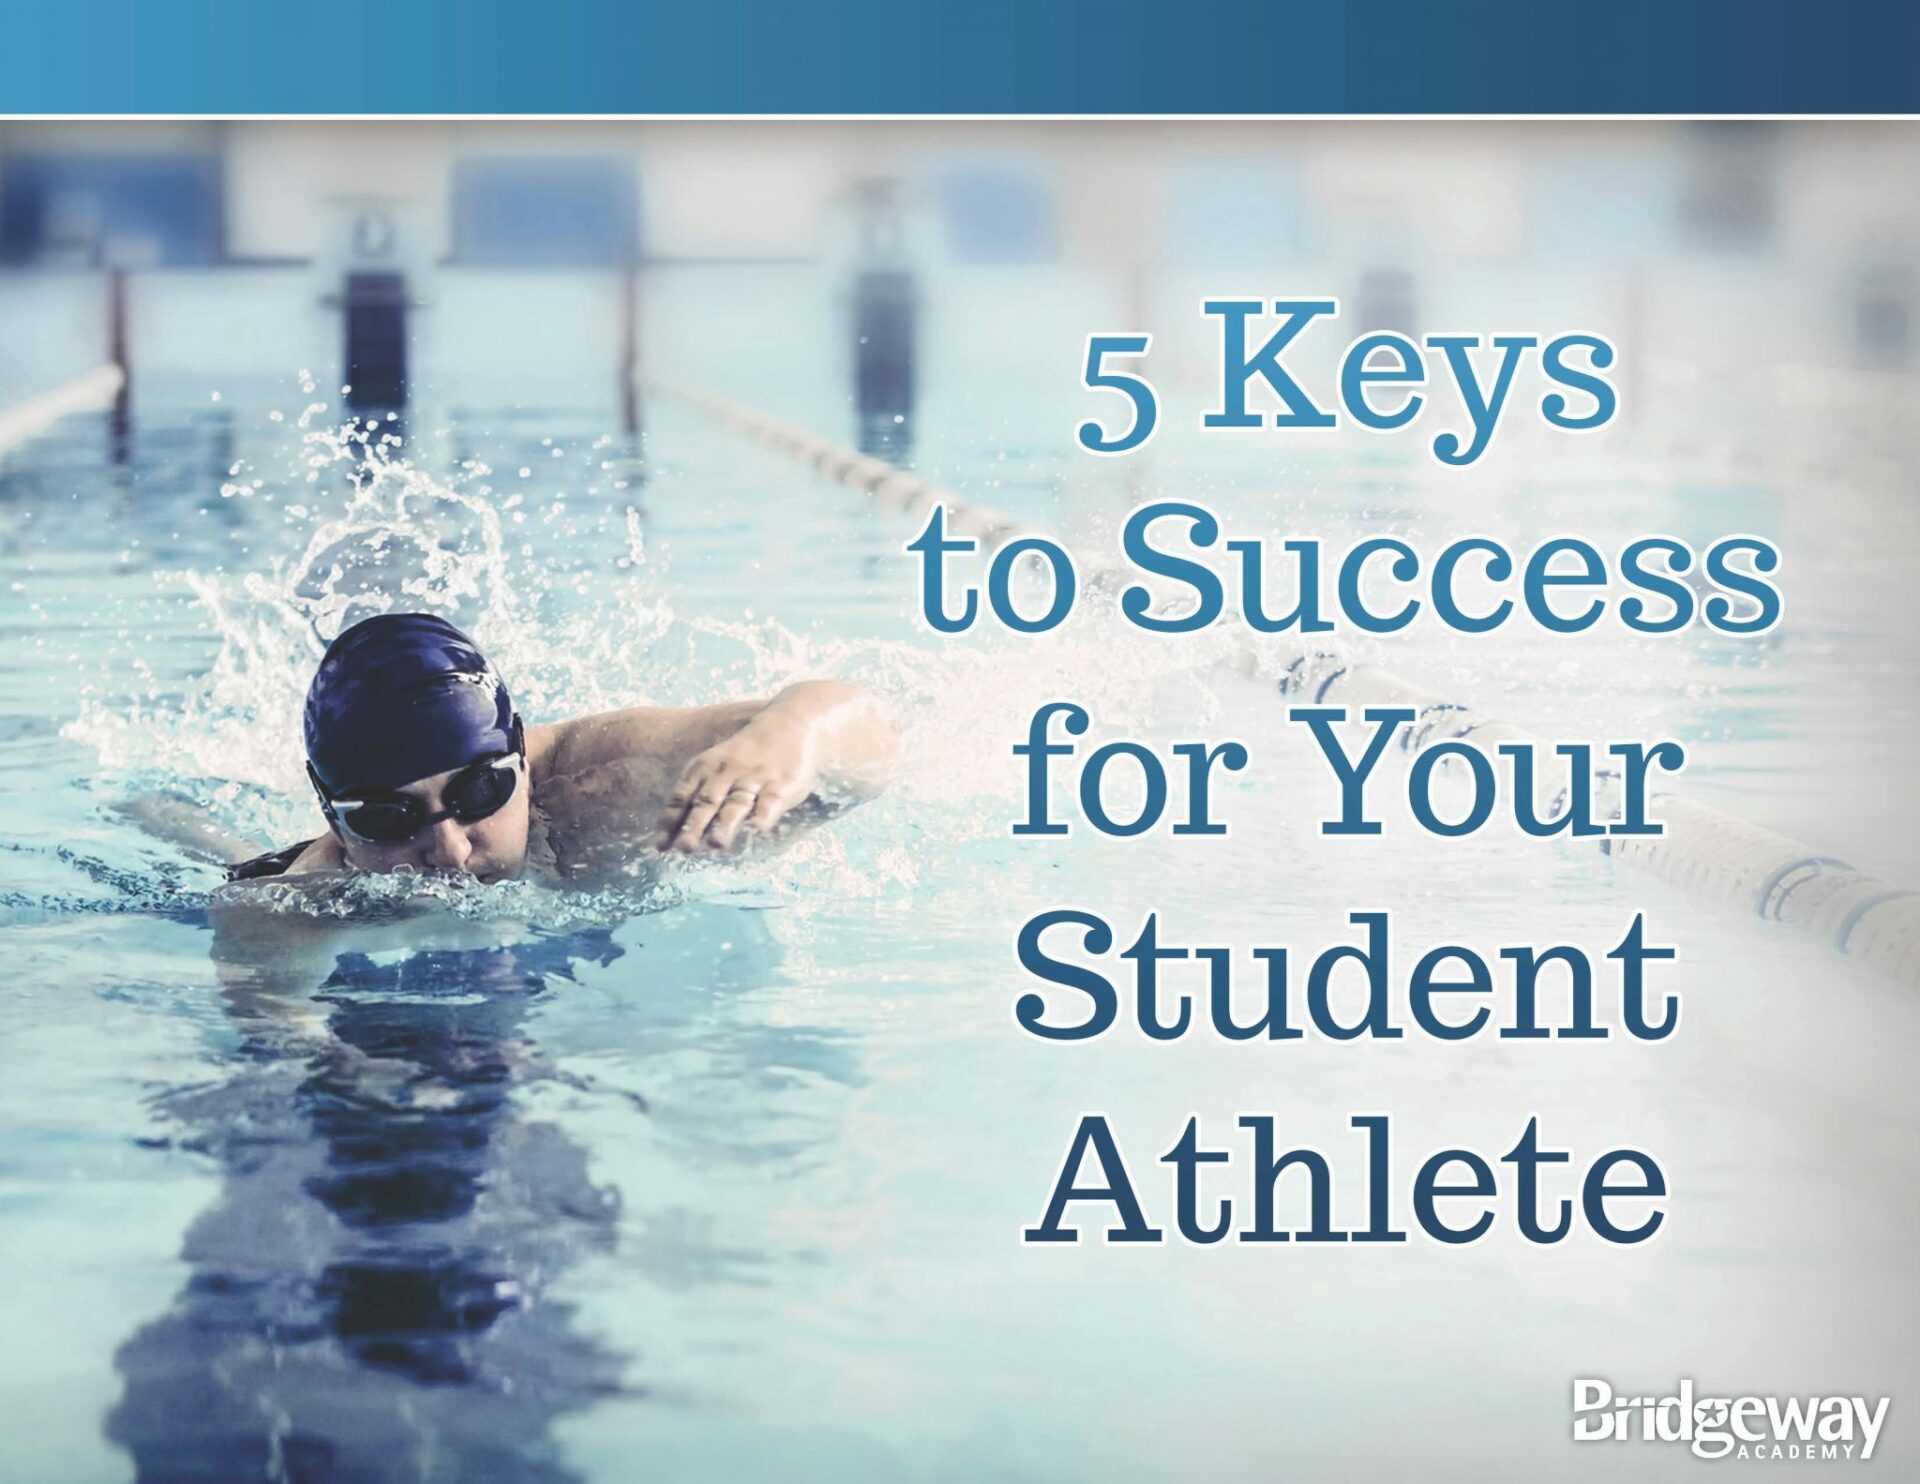 student athlete, 5 Keys to Success as a Student-Athlete